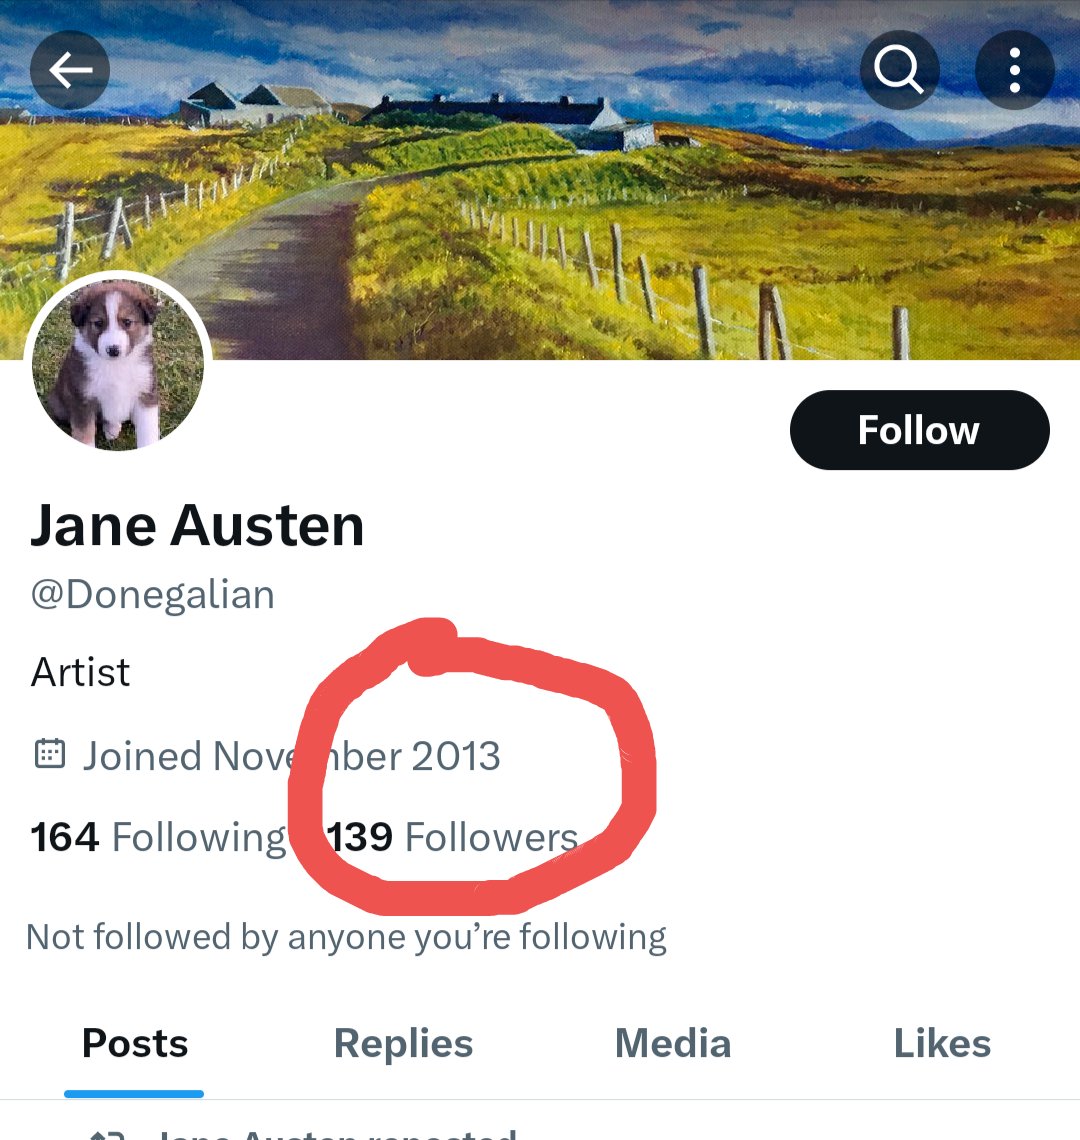 @rtomasi1 @Donegalian @Andywalkswitme @71_blazer @KarlT56 @robertalpeters Jane is a bot/burner/sock puppet account for someone. Not worth your time responding to.